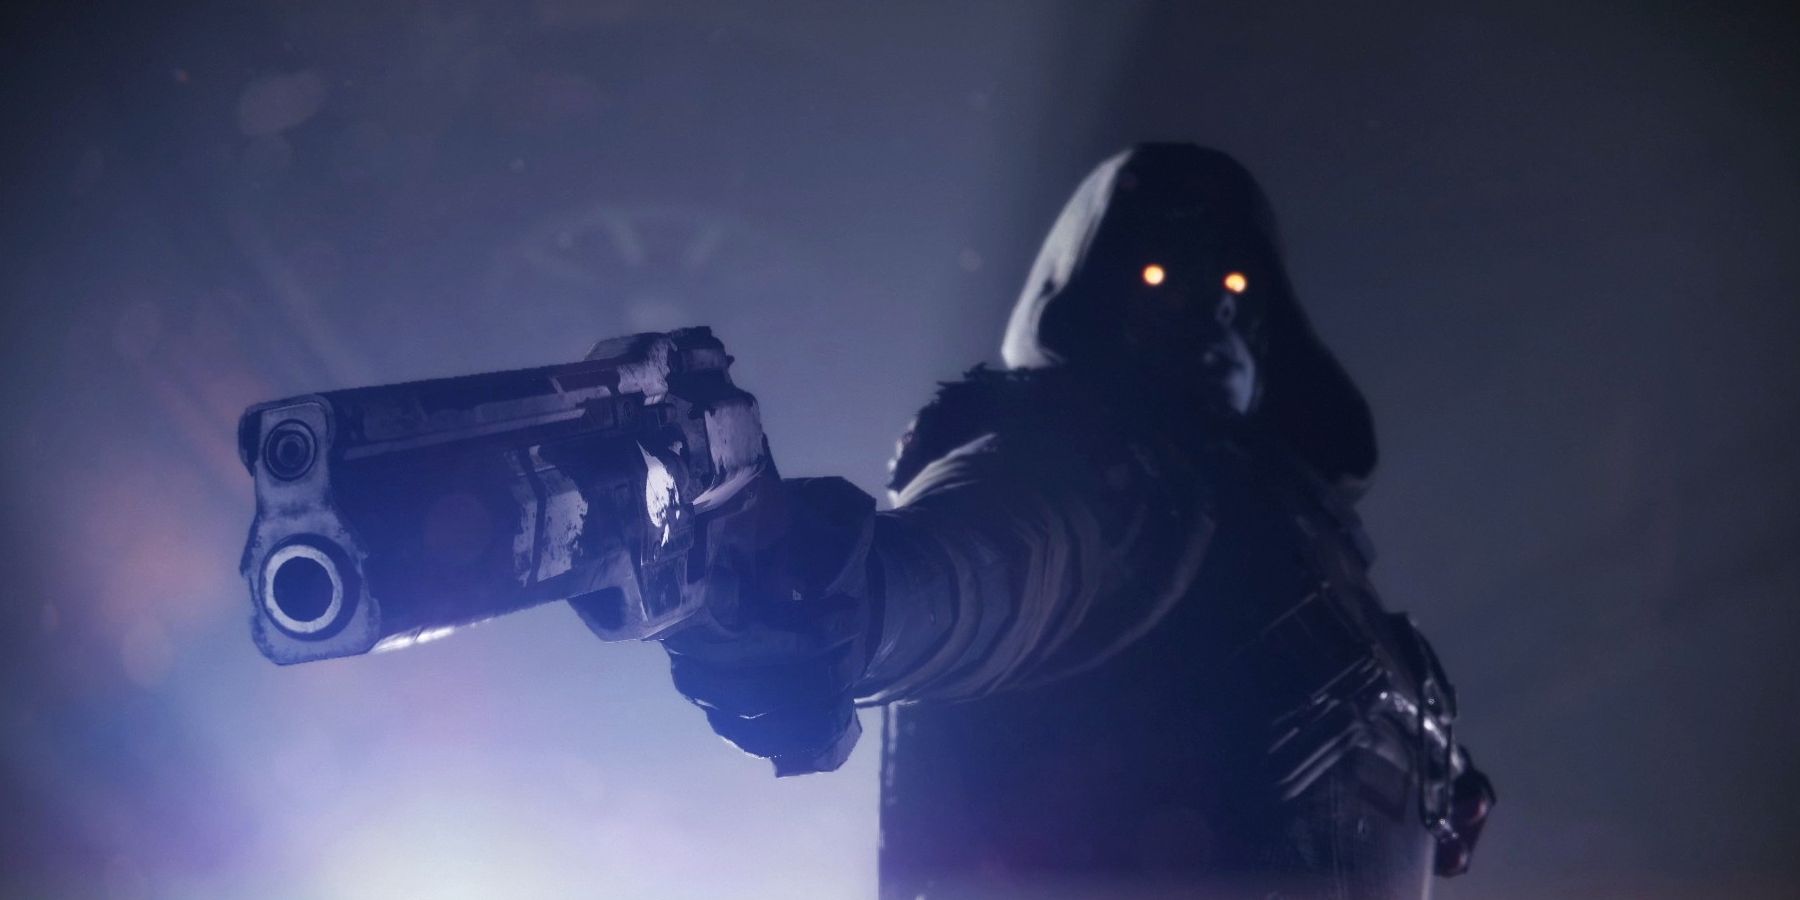 Uldren Sov wields the exotic hand cannon Ace of Spades in a still from Destiny 2.